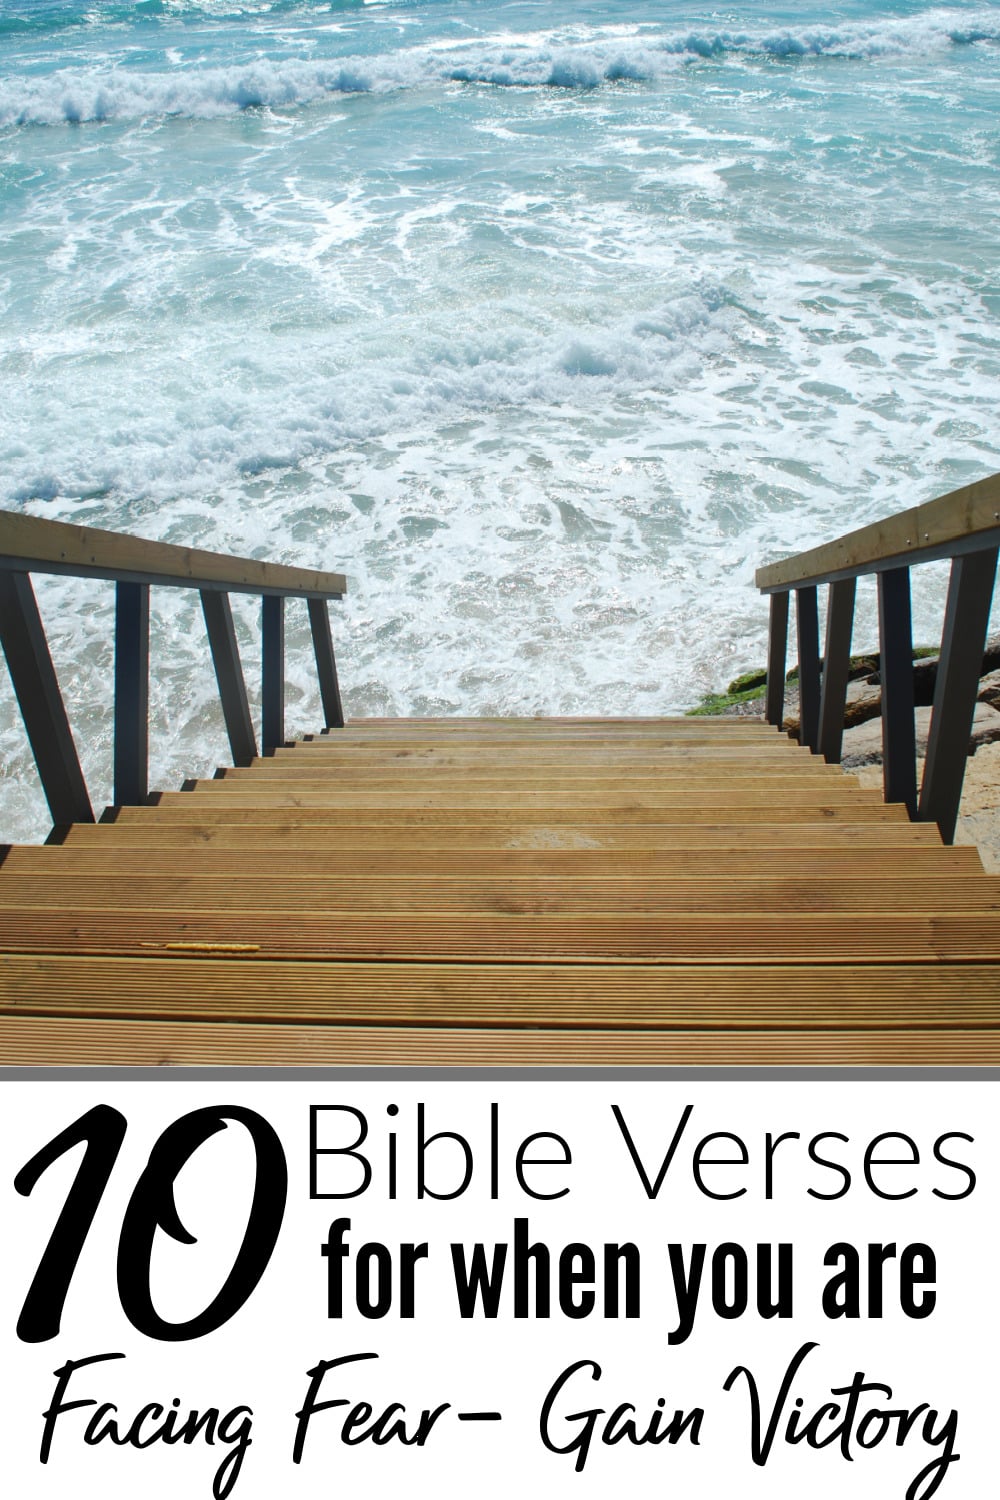 10 Bible Verses for when you are facing fear. Get ready to gain victory in Jesus name.